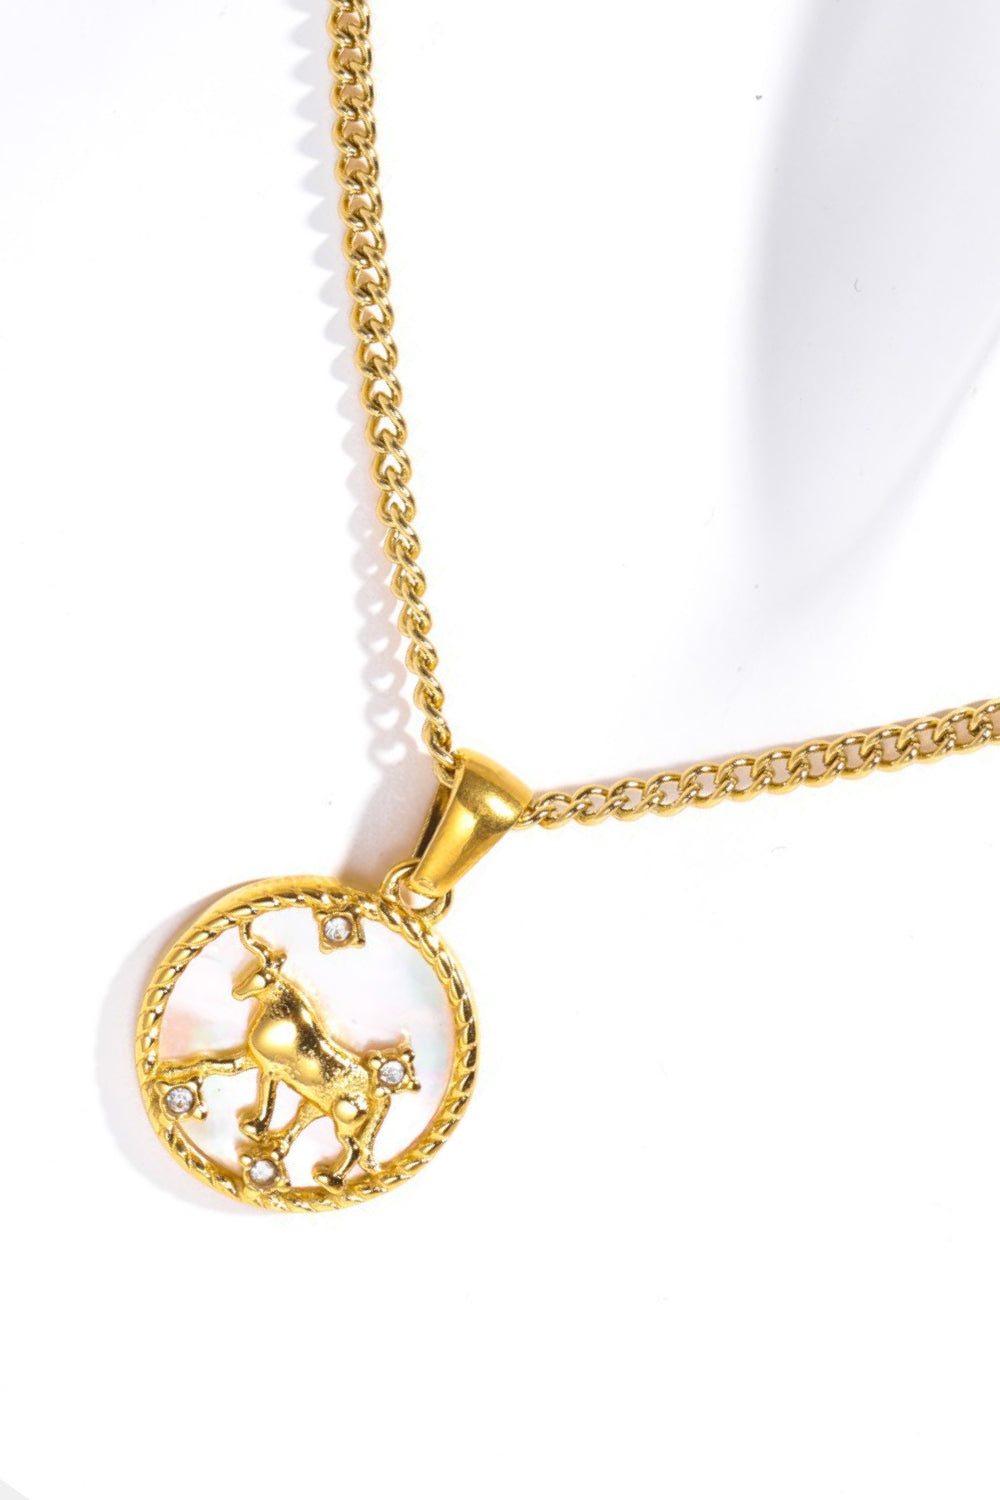 Goldenrod Constellation Pendant Stainless Steel Necklace Zodiac